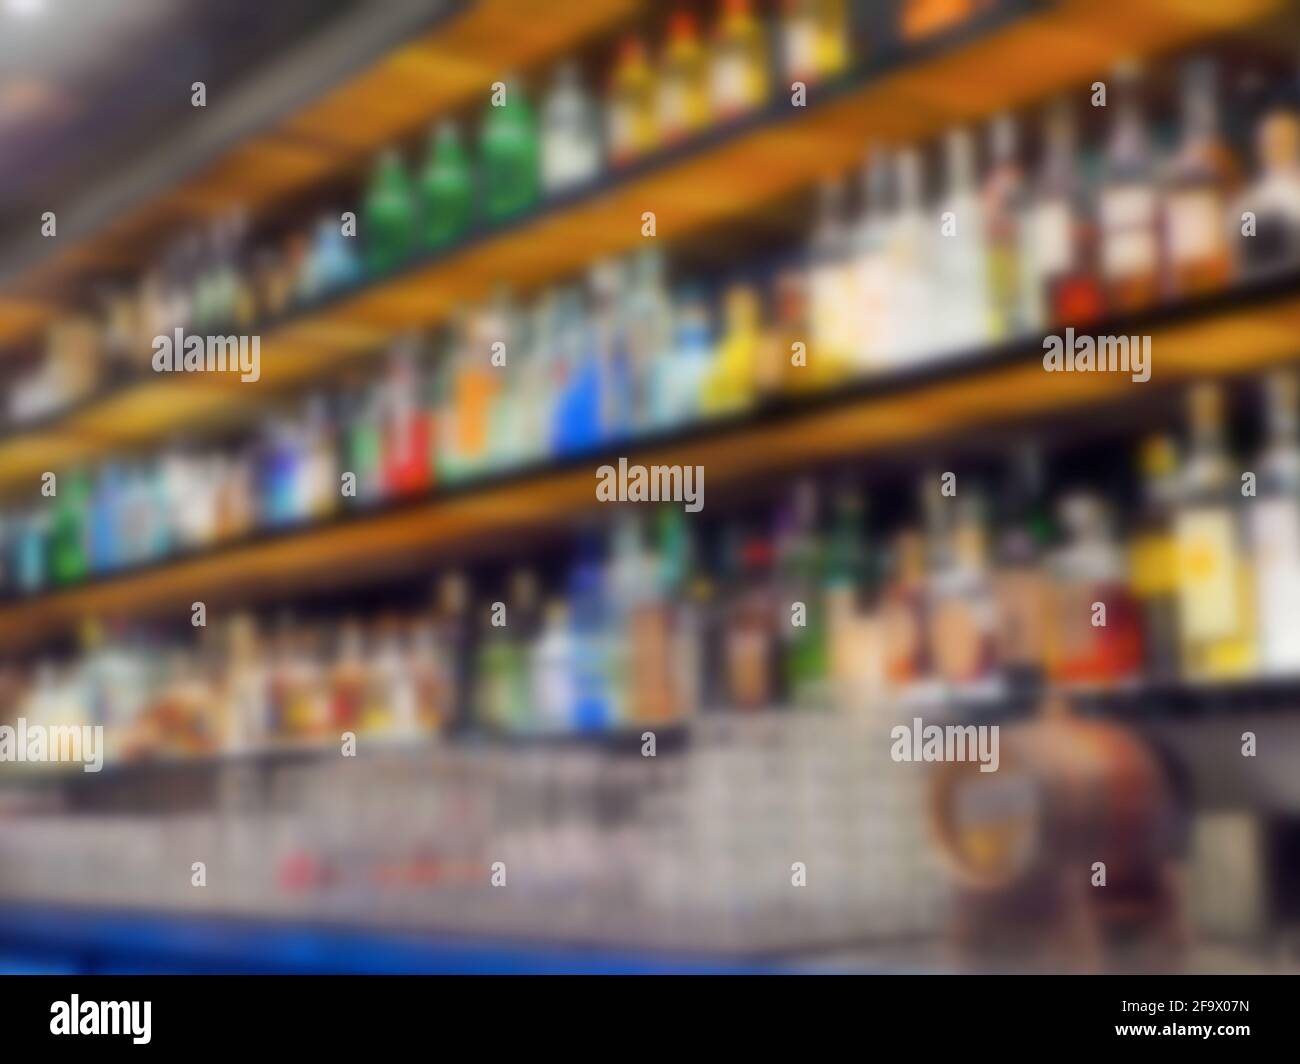 Blurred background of a bar with lit counters showing various drinks available Stock Photo